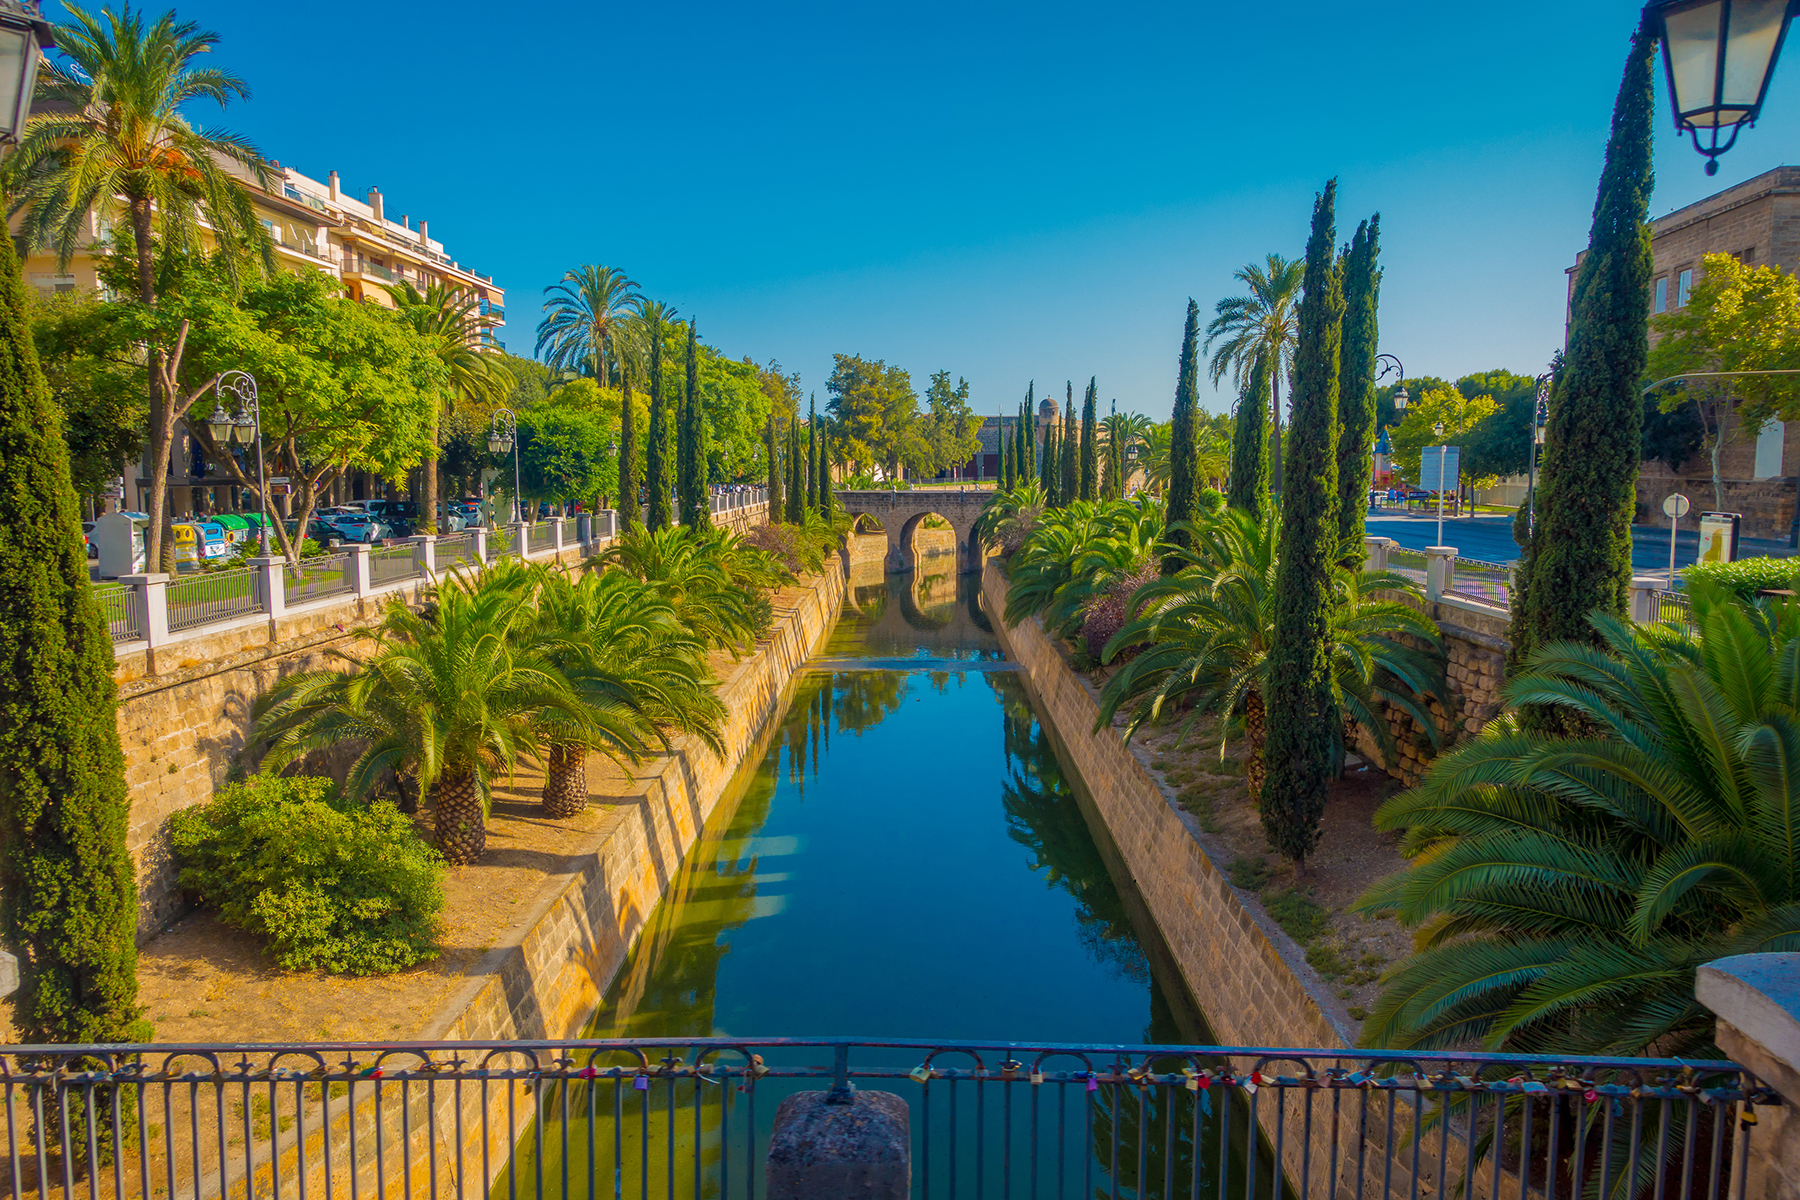 A Balearic stunner: what to see and do in Palma, Mallorca